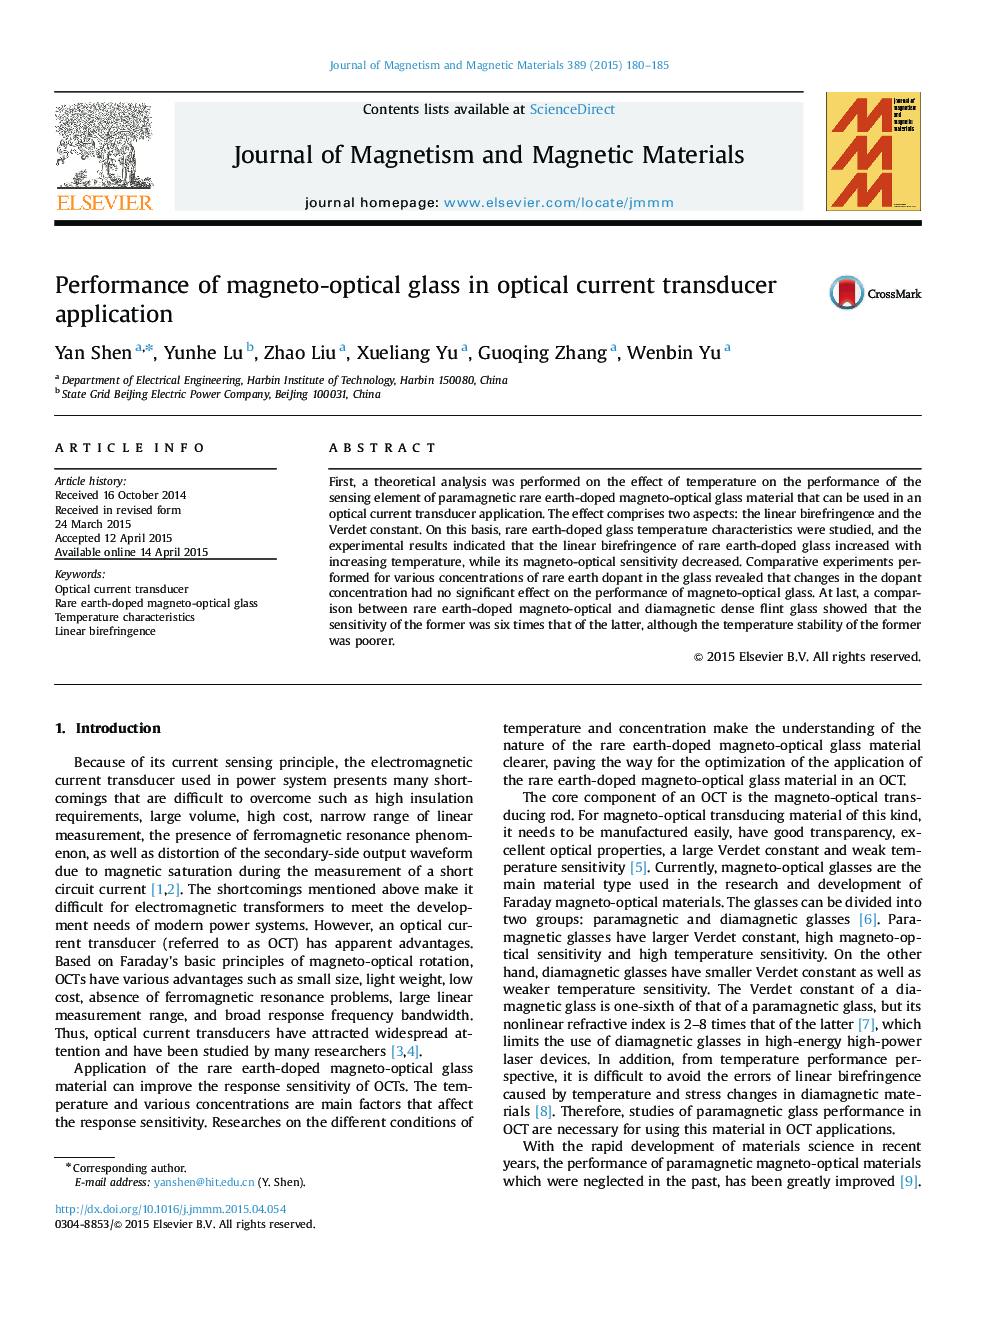 Performance of magneto-optical glass in optical current transducer application